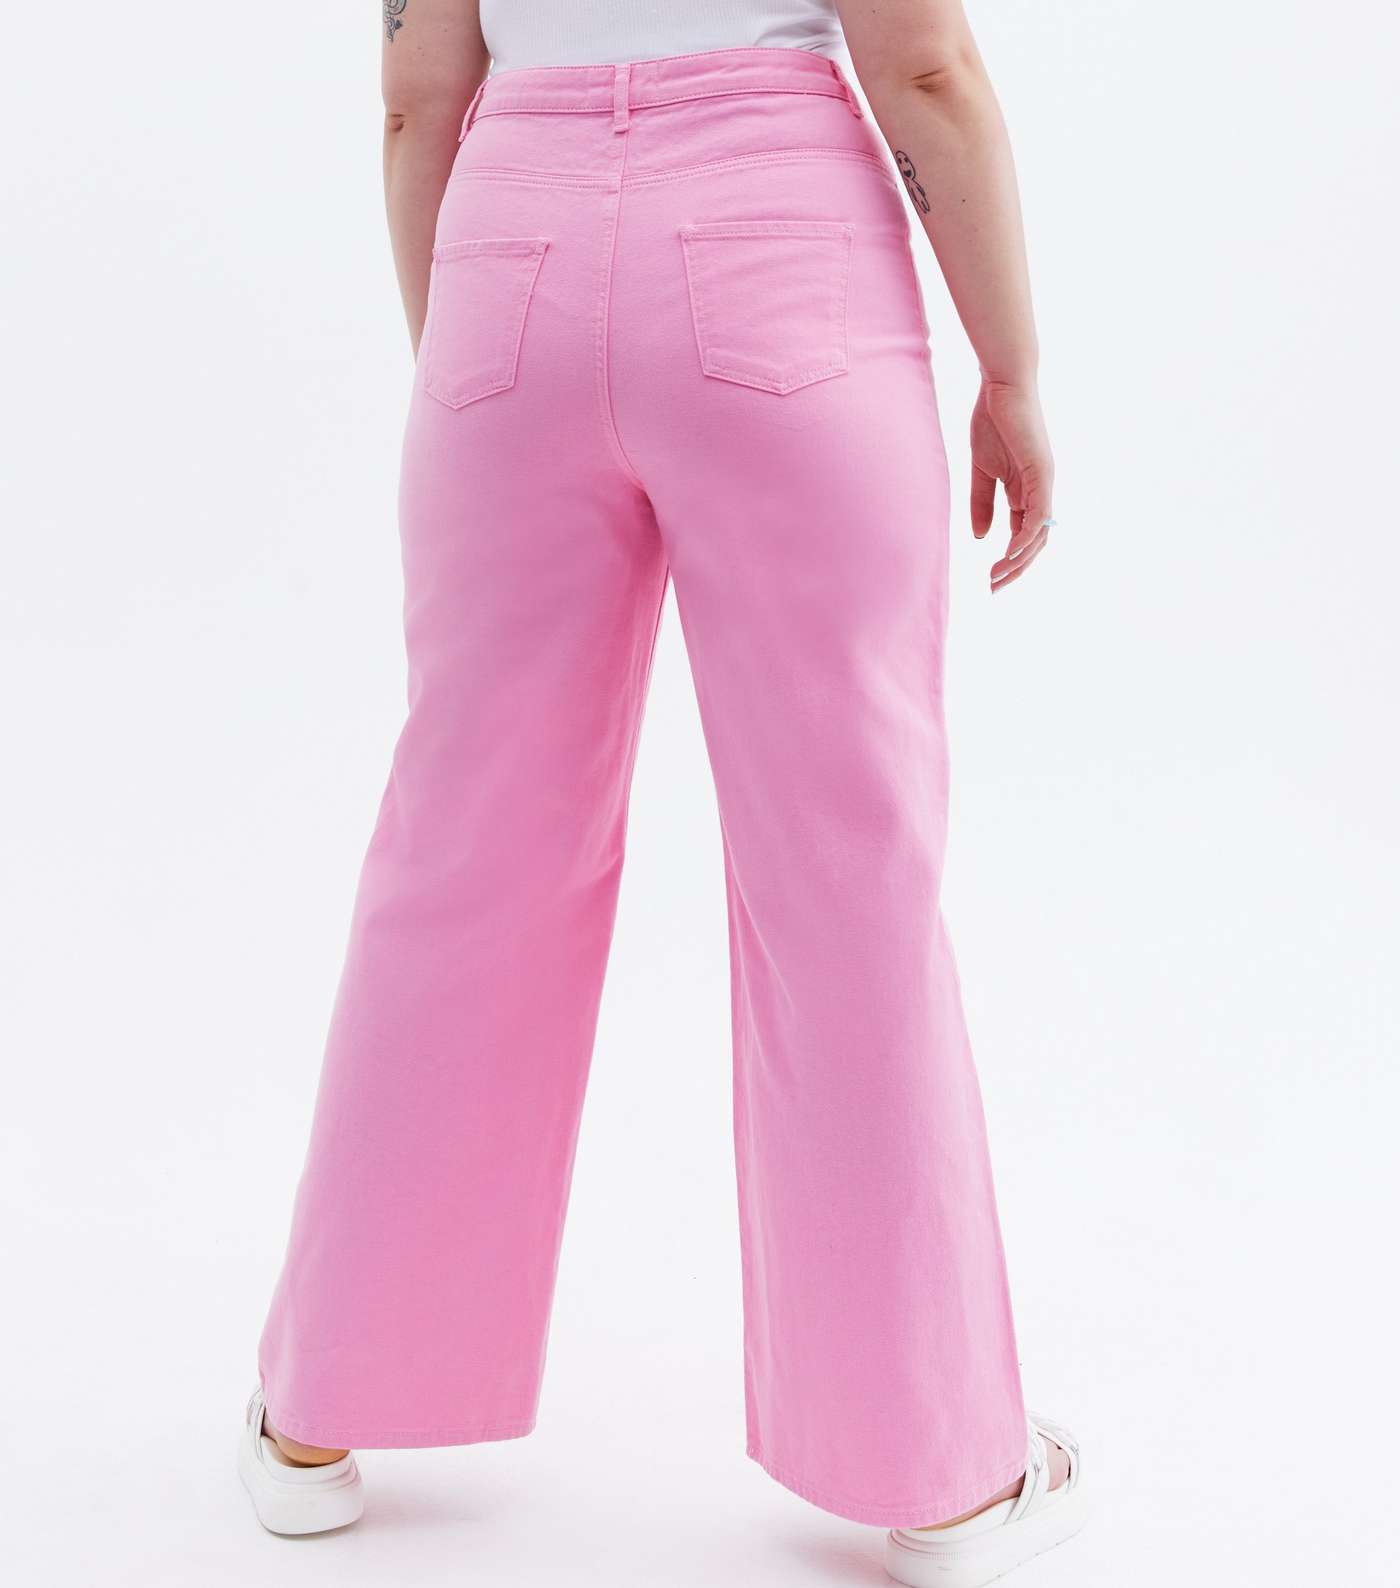 Turn up the Volume Curves Pink Extreme Wide Leg Jeans Image 4